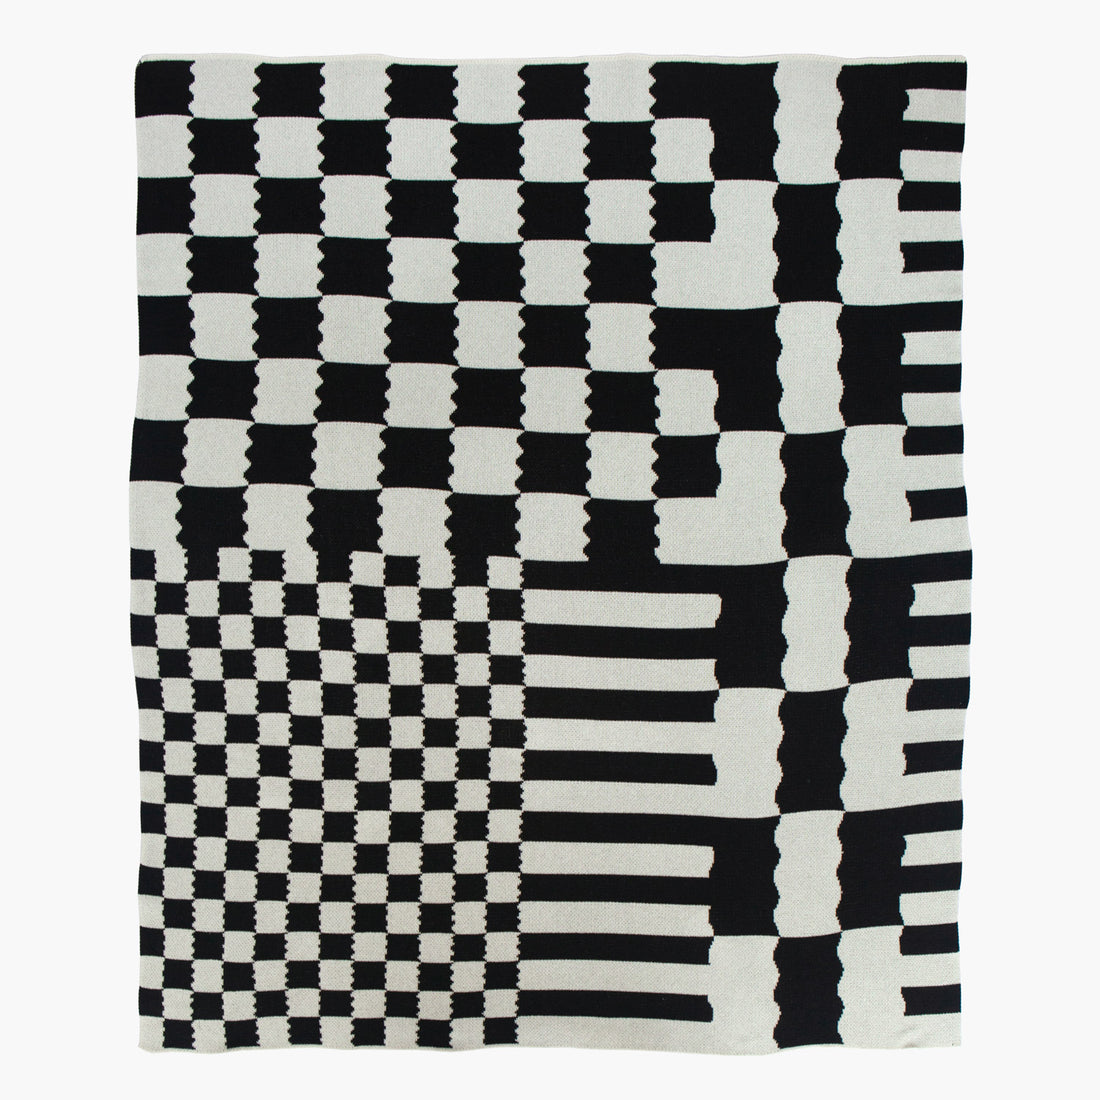 wholesale LV blankets,black and white blankets